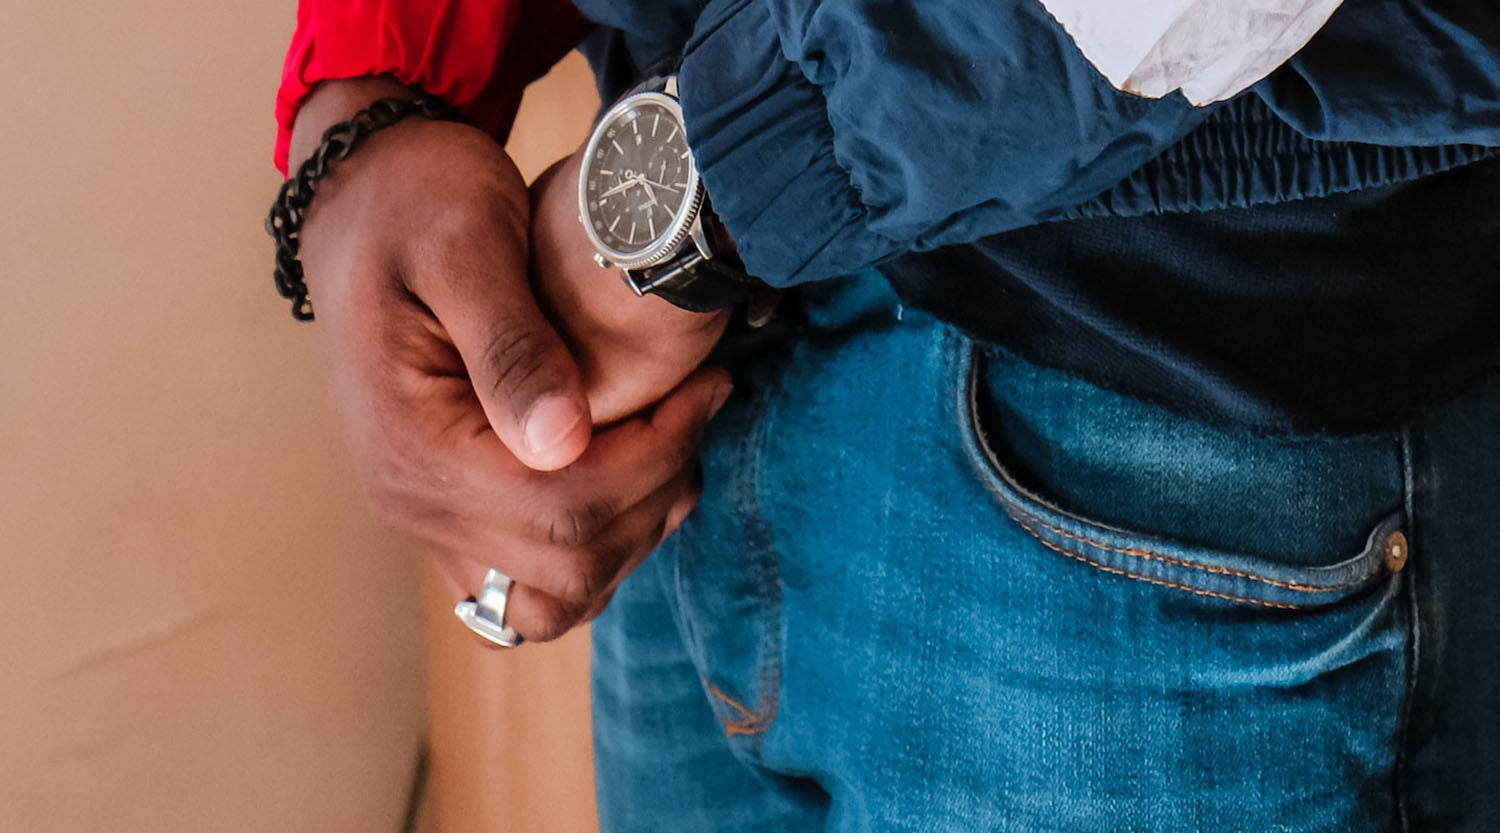 close up shot of man's hand wearing a fashion ring, black bracelet, and a watch